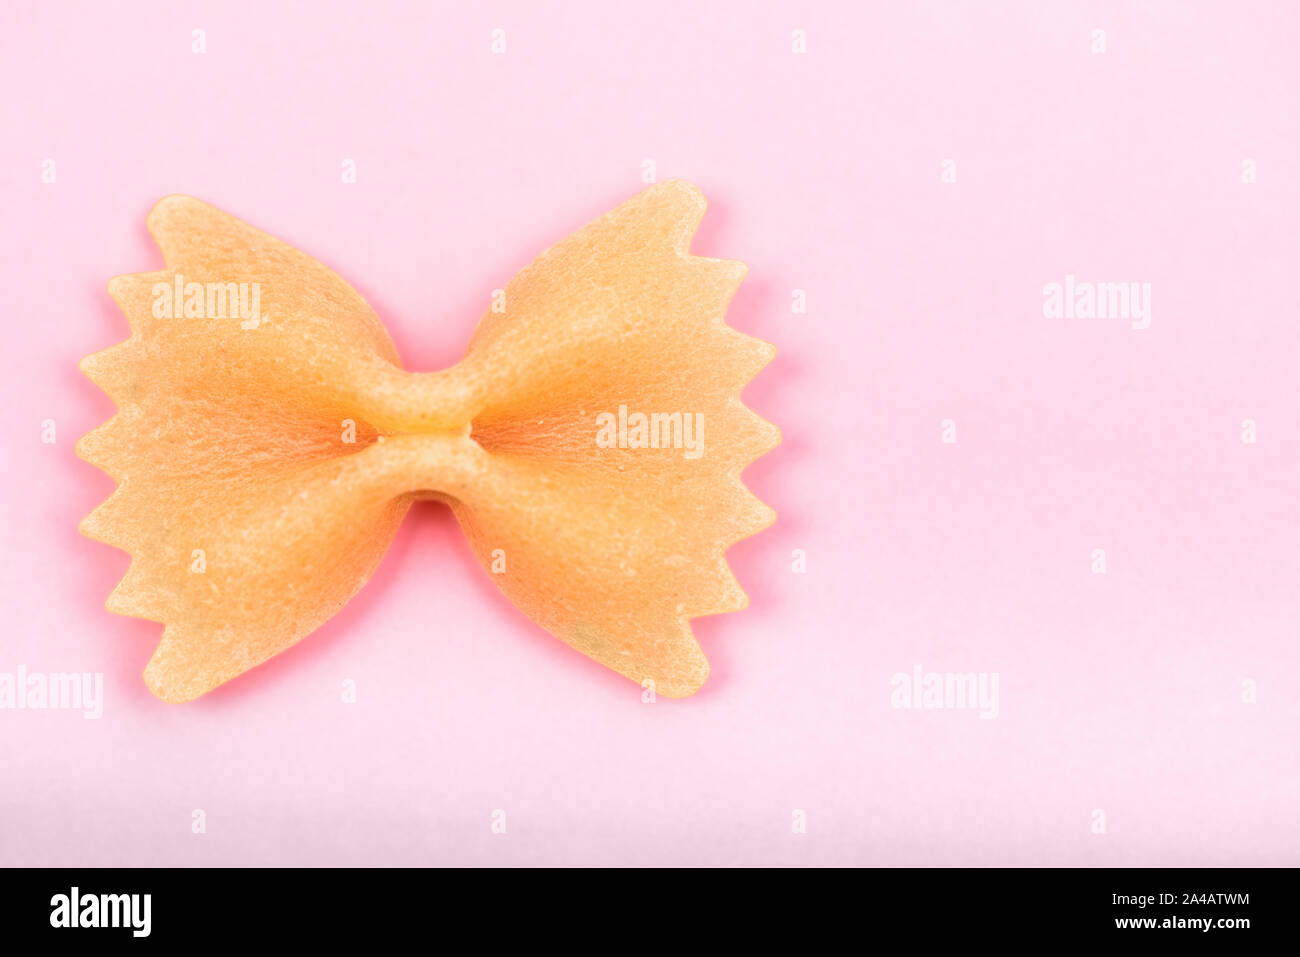 Farfalle pâtes en forme de proue tirant macro sur fond rose isolated with clipping path Banque D'Images